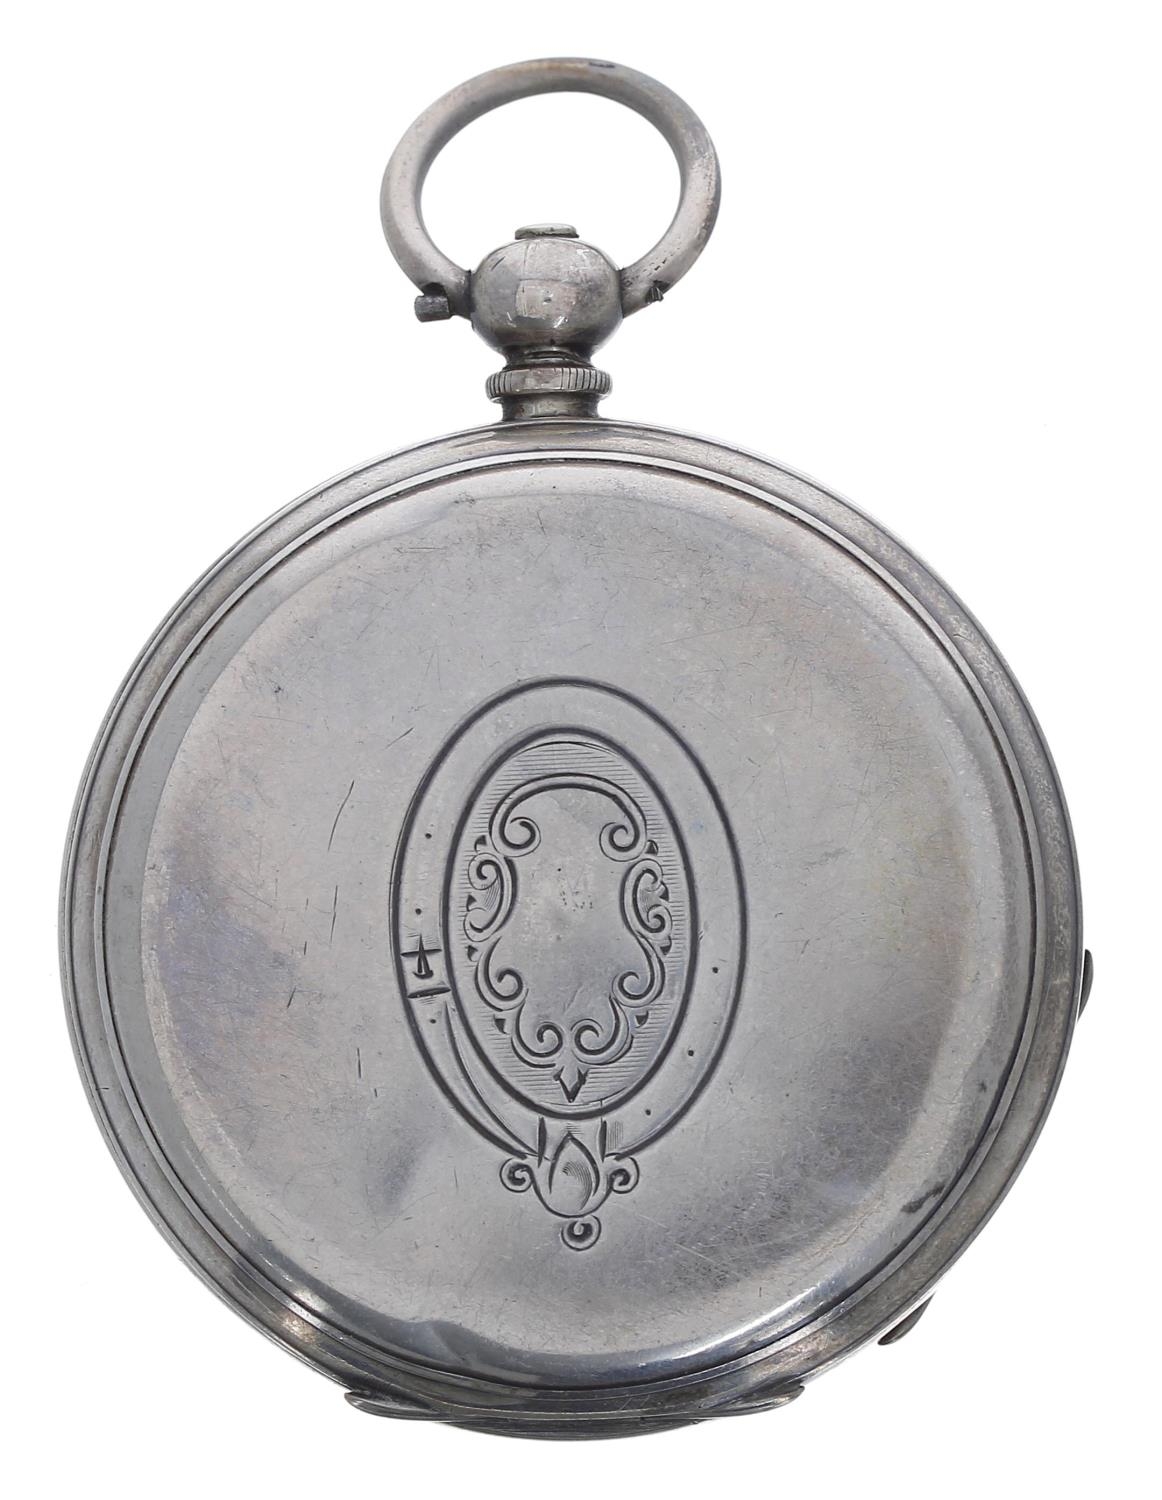 Swiss silver (0.935) lever pocket watch, three quarter plate movement inscribed 'Compensated - Image 4 of 4